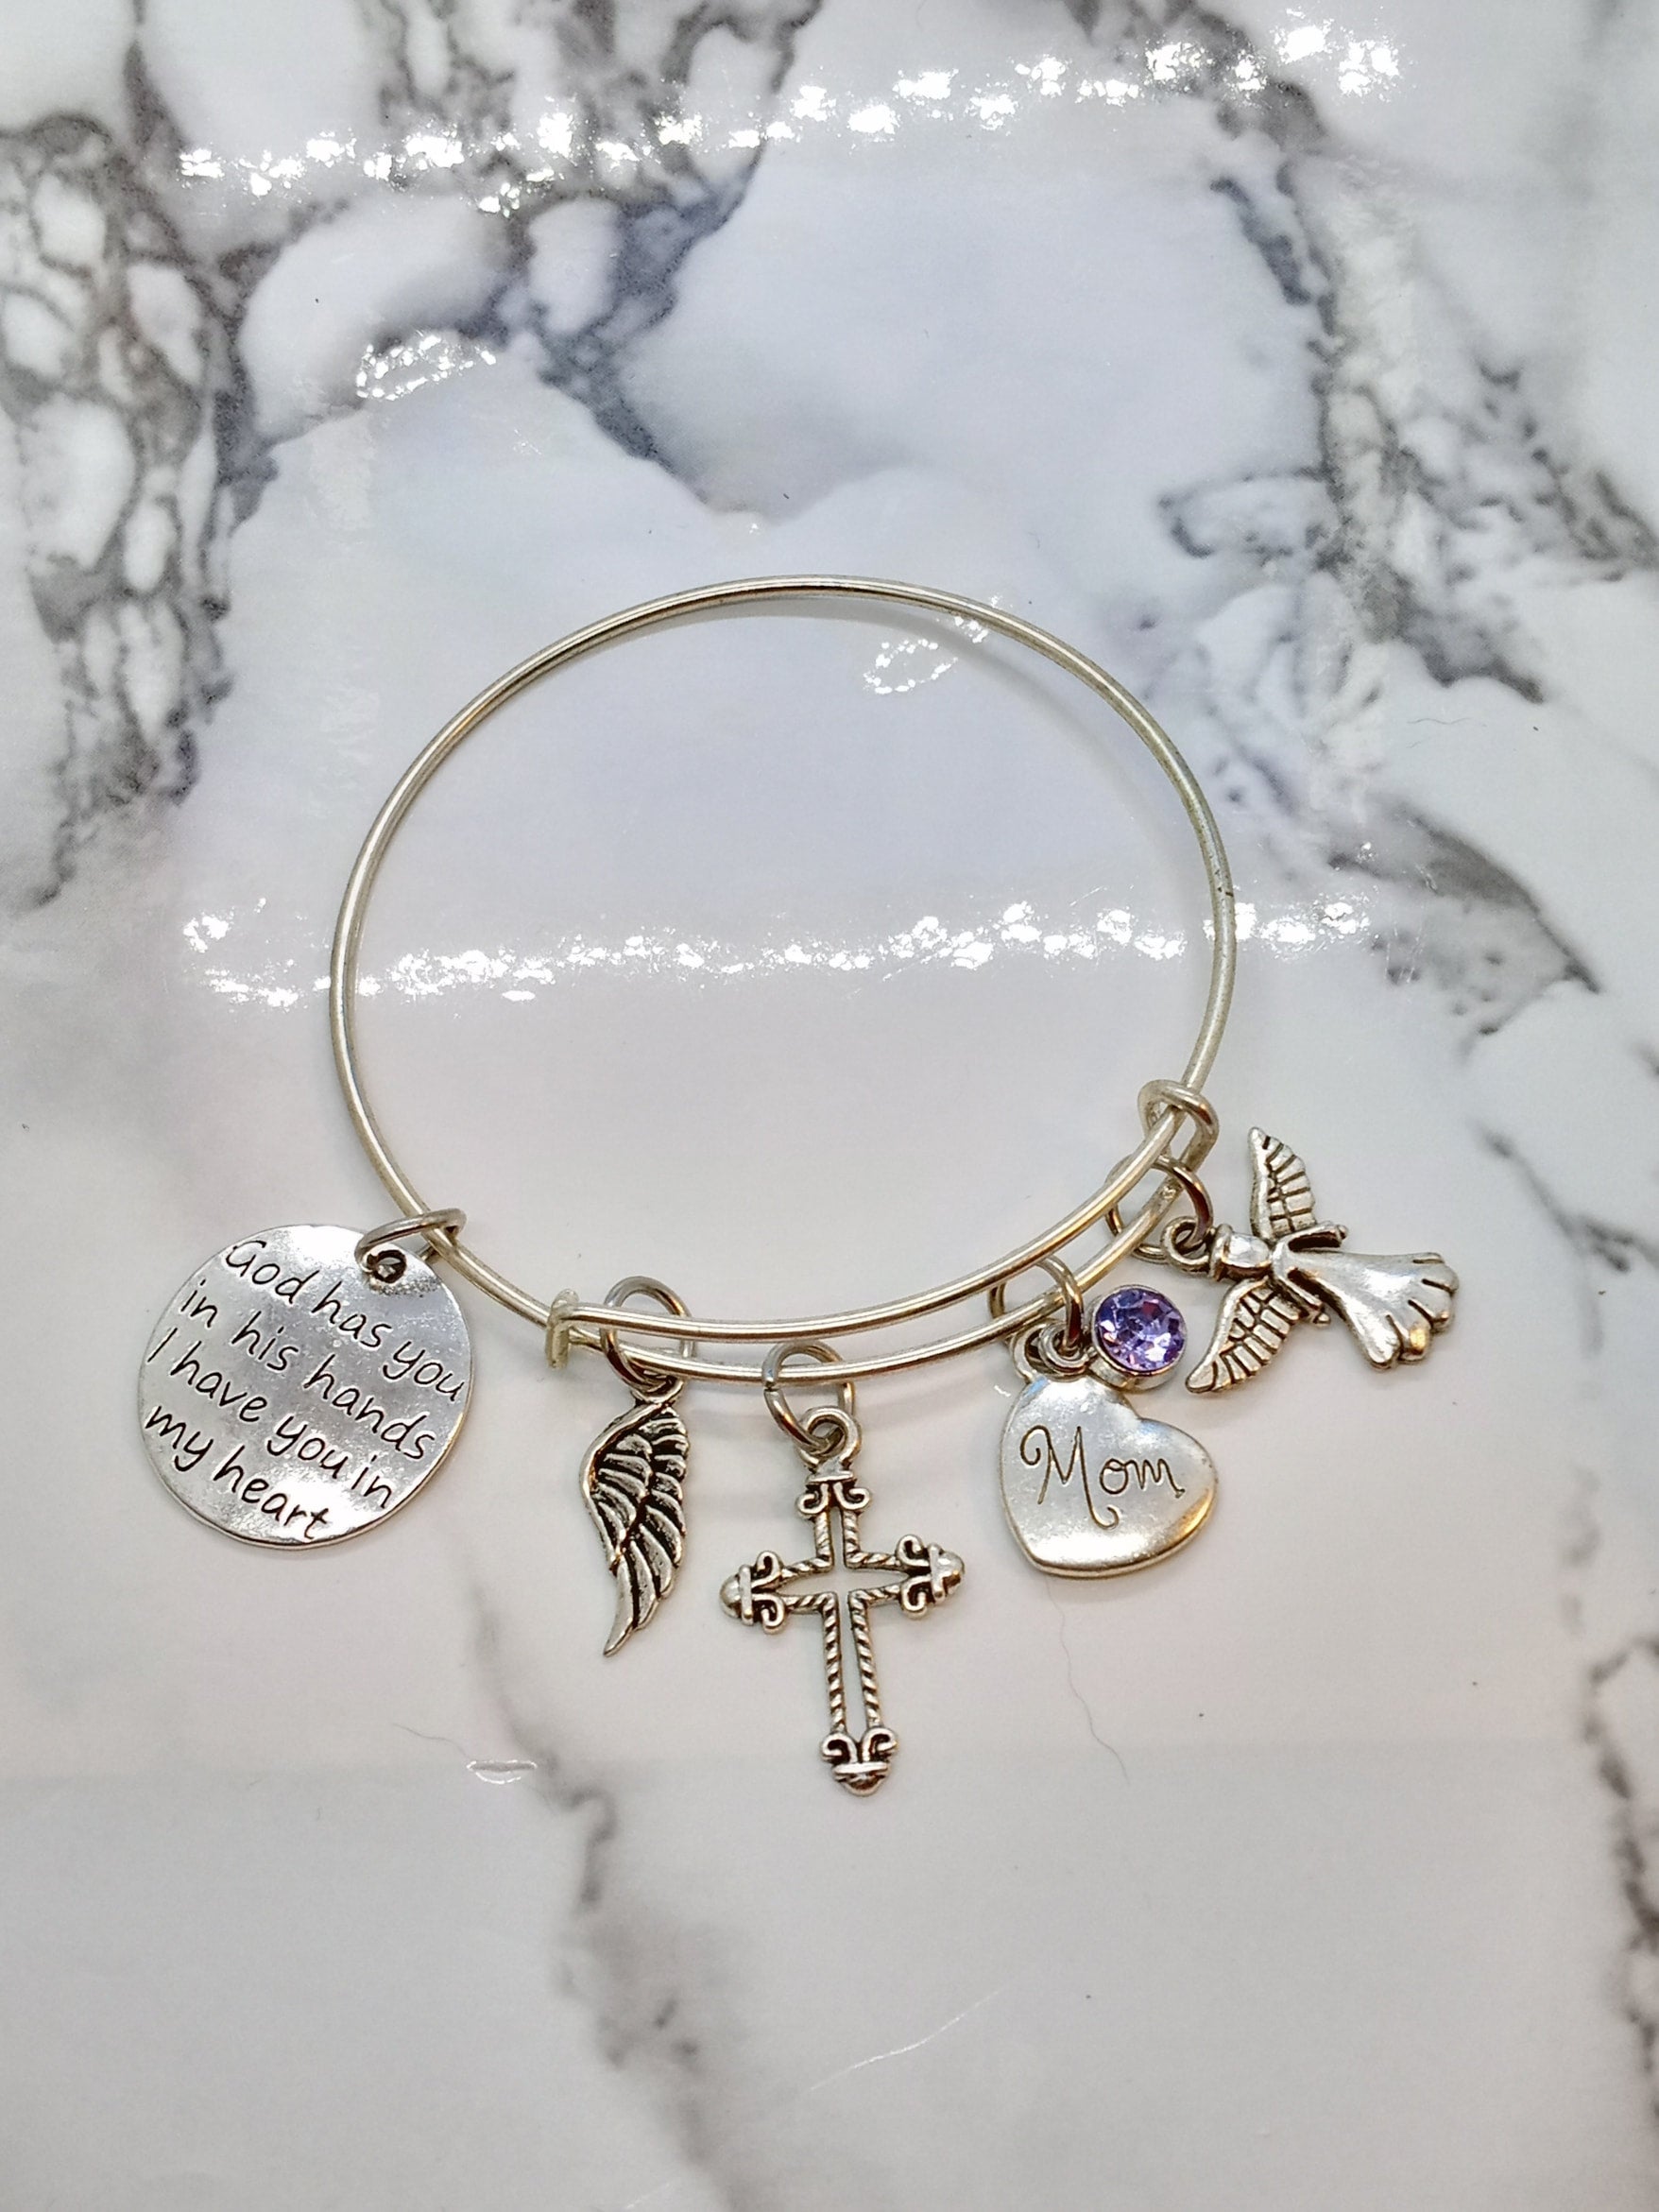 Buy The Love Between, a Brother And, Sister is Forever, Brother, Sister, Brother  Sister, Memorial, Gifts For, Silver Bracelet, Charm Bracelet Online in  India - Etsy